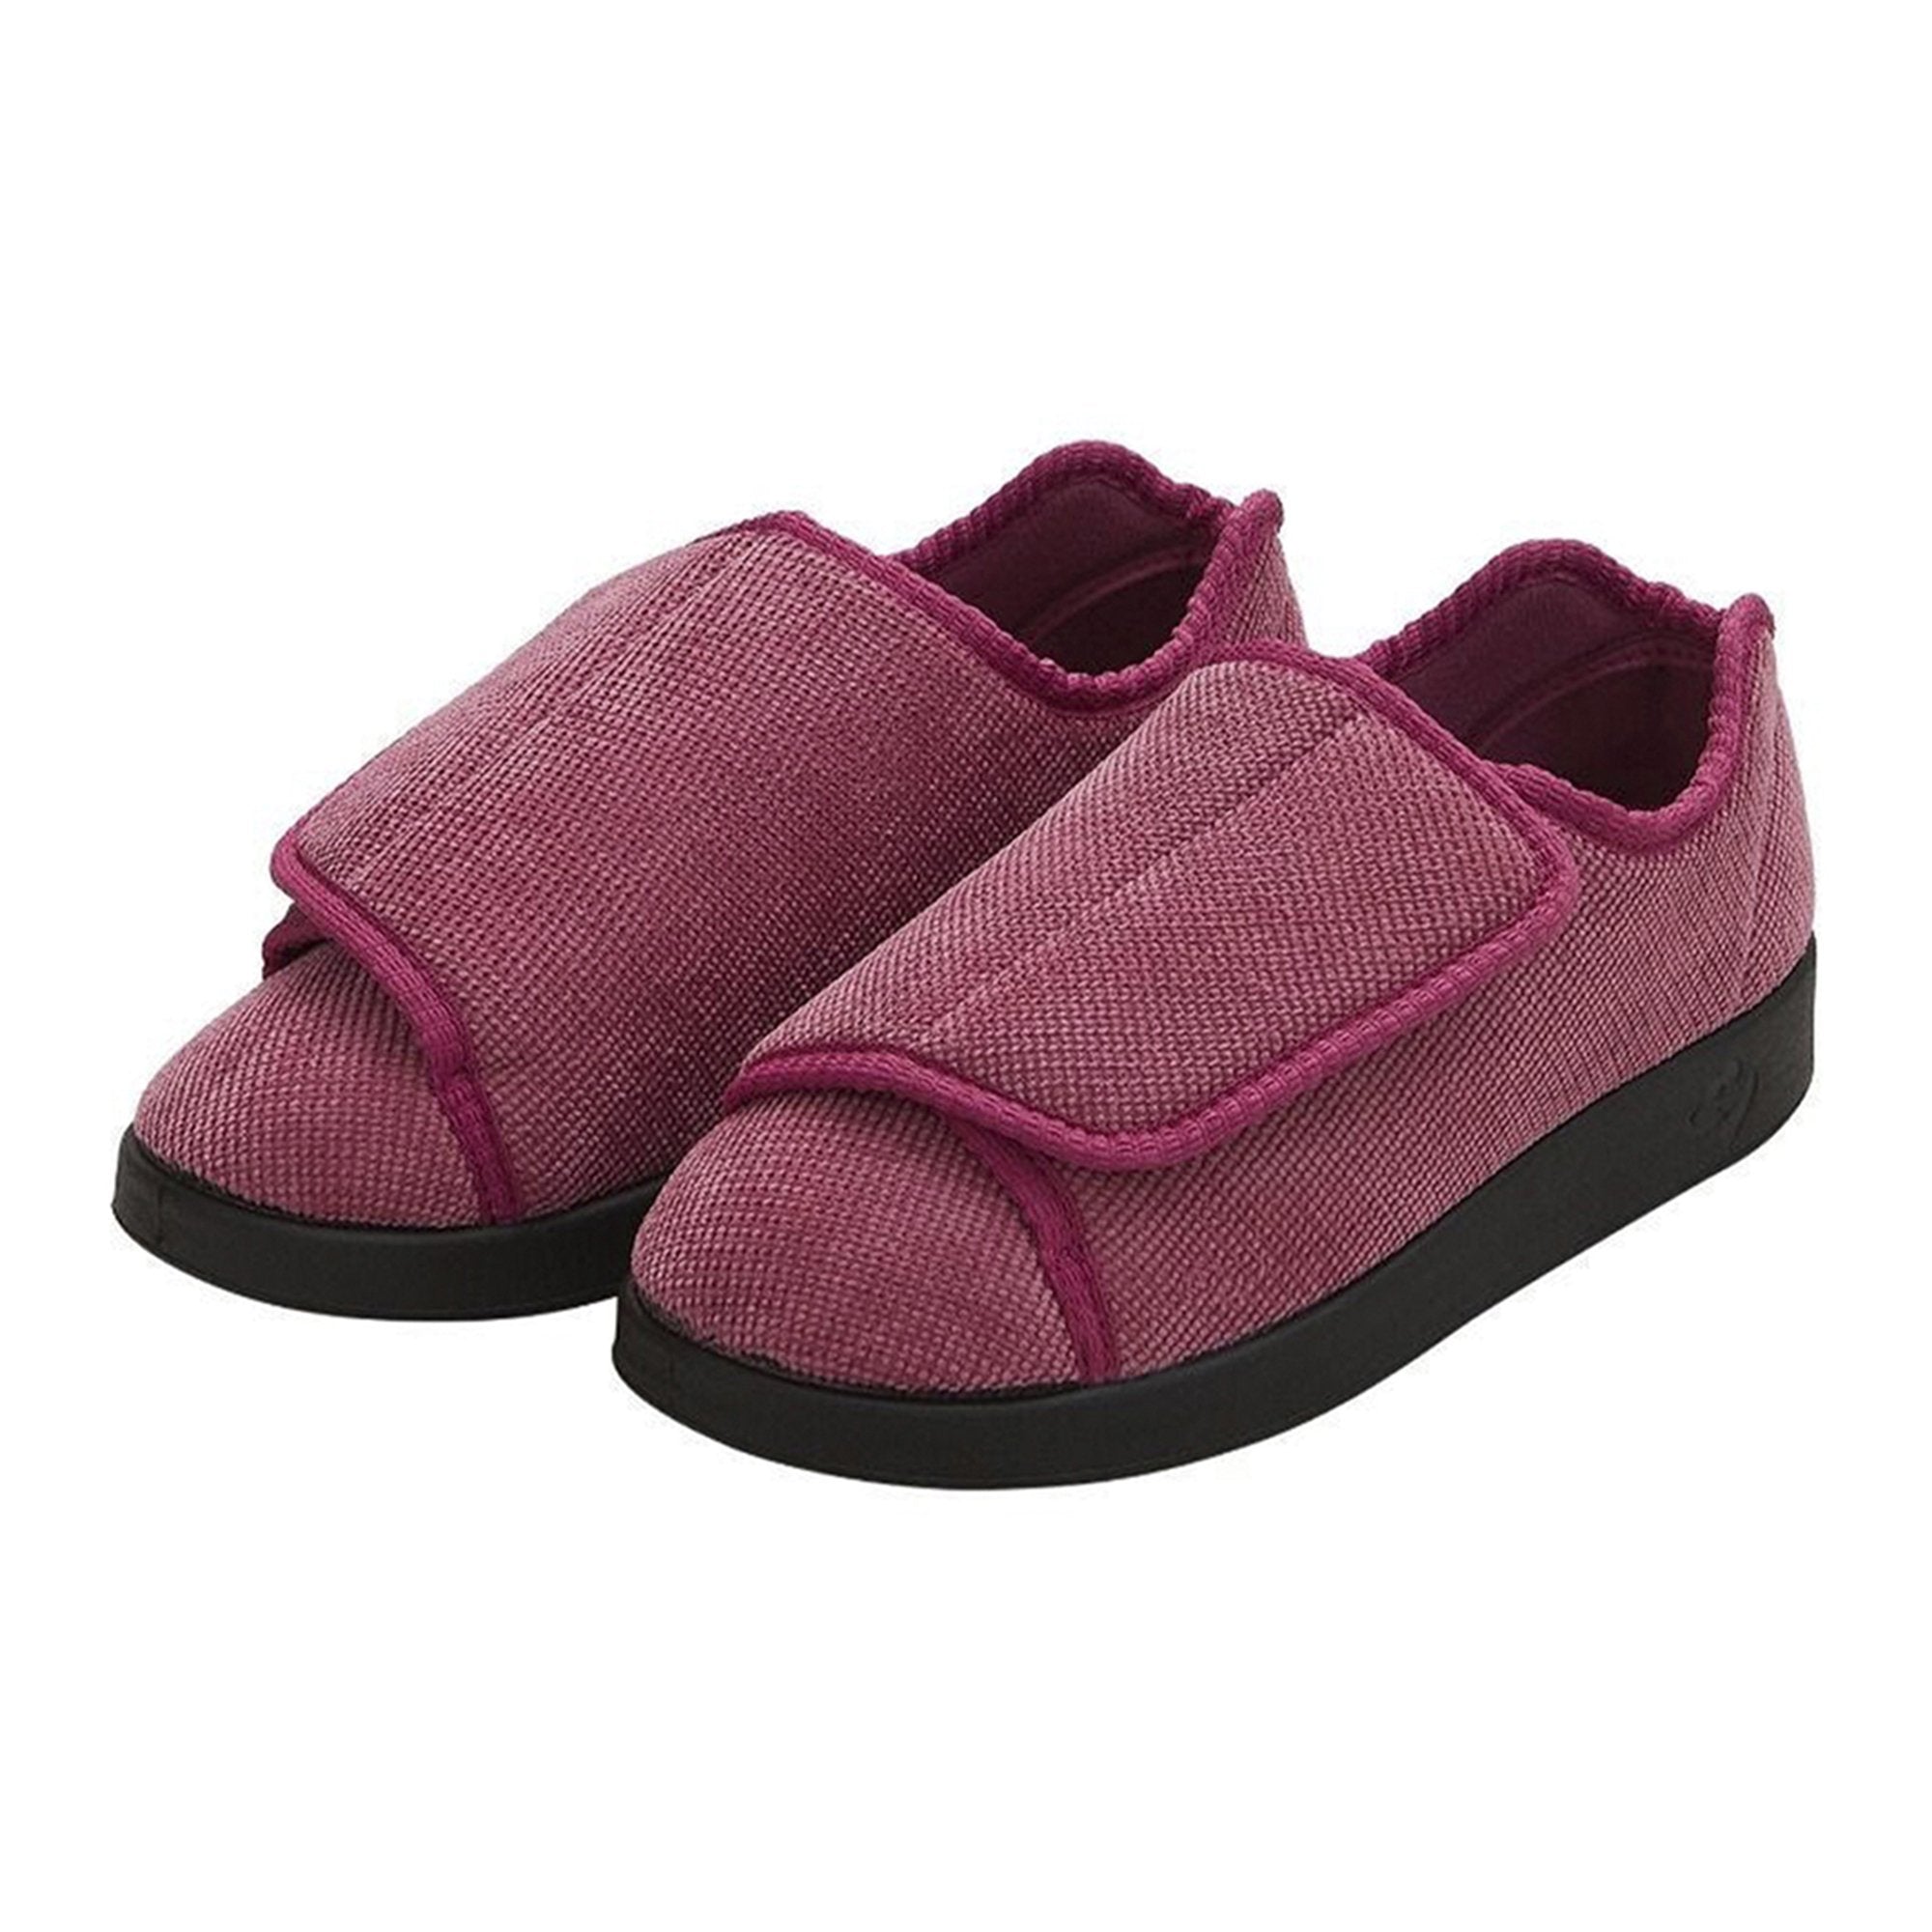 Slippers Silverts® Size 8 / 2X-Wide Dusty Rose Easy Closure